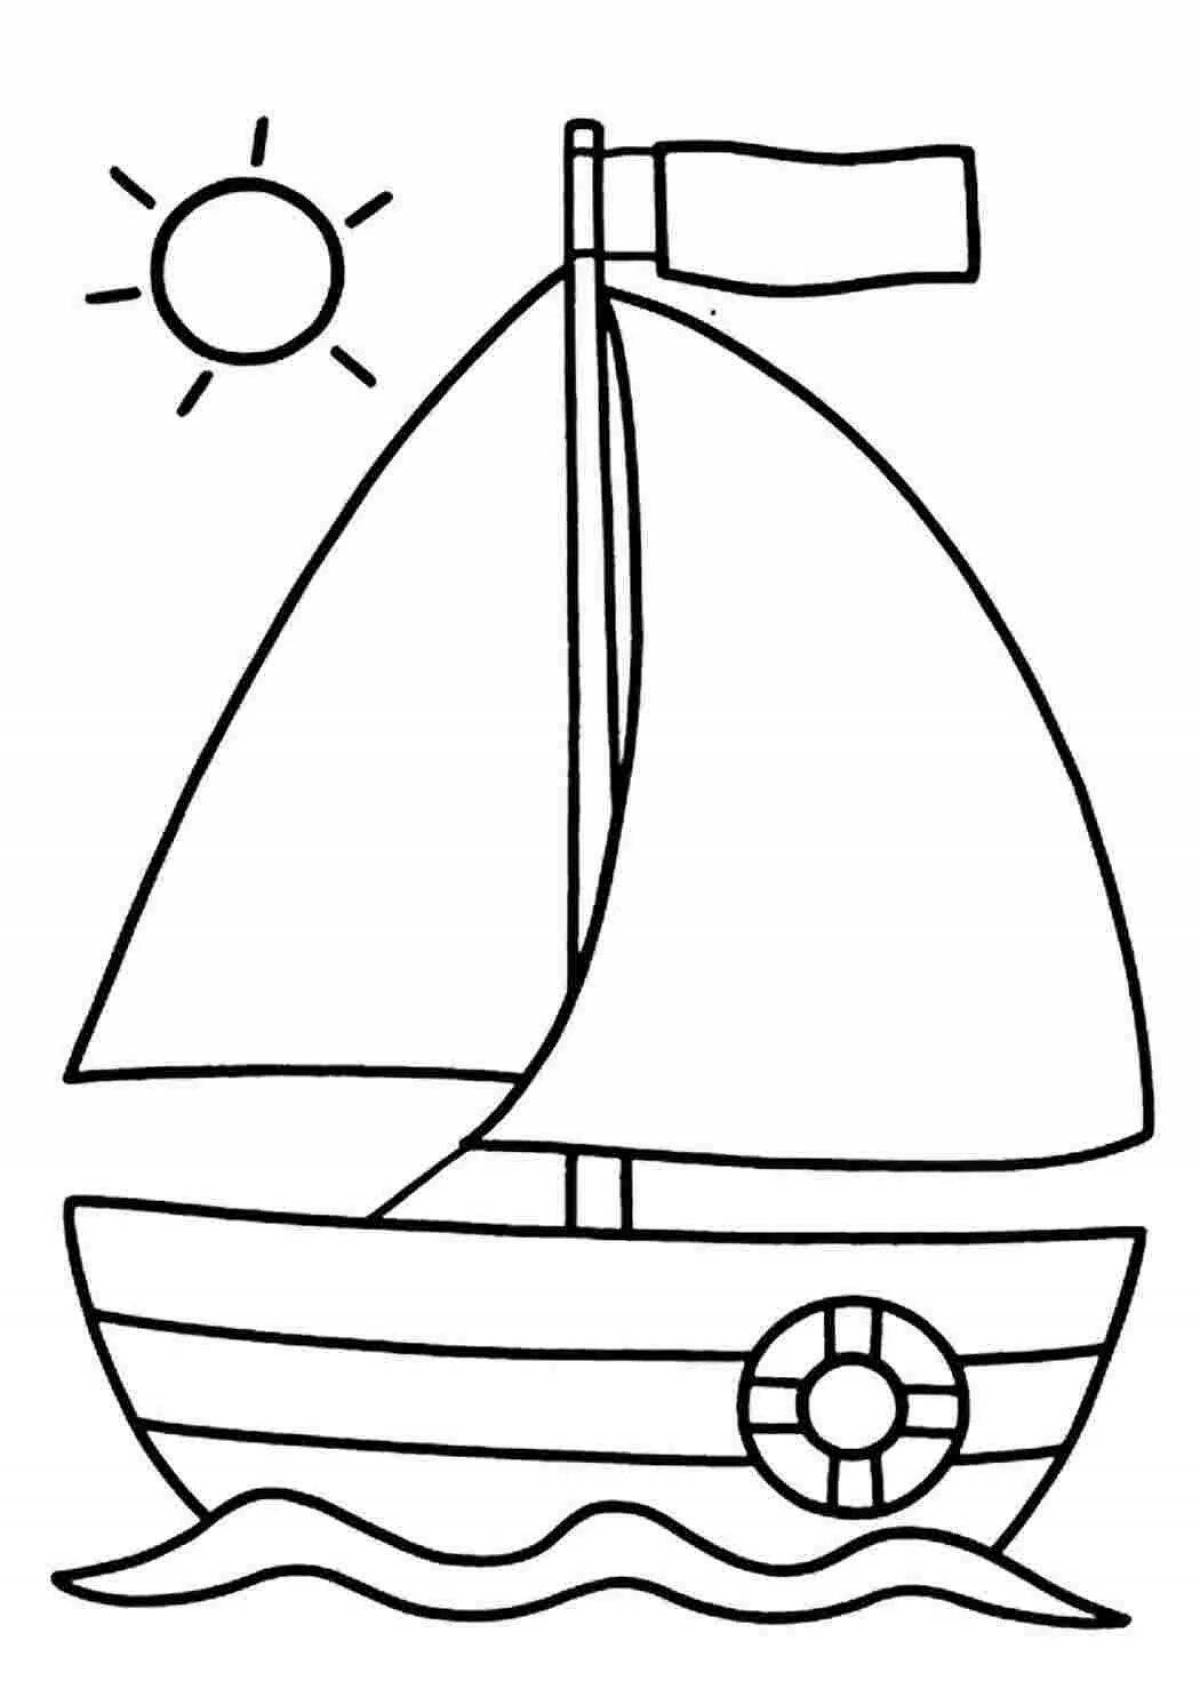 A fun boat coloring book for 6-7 year olds